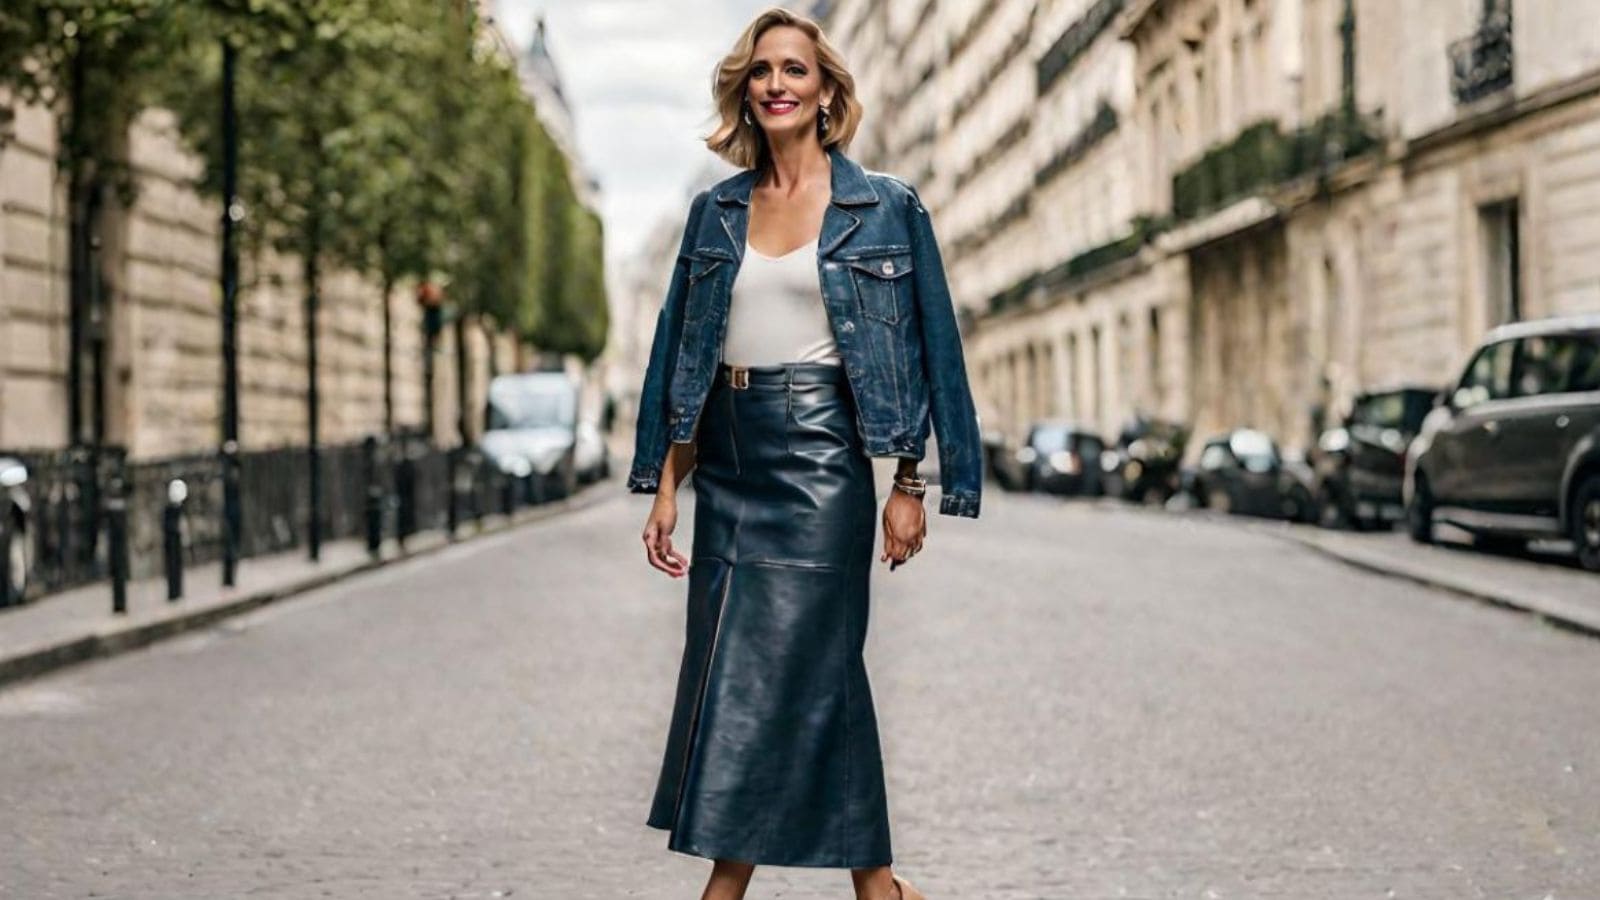 <p>Imagine rocking an edgy <a href="https://blog.petitedressing.com/leather-skirt/" title="">leather skirt</a> with a classic denim jacket – total style goals! Leather is such a statement fabric and the sleek, curve-hugging leather skirt brings out the tone of your denim jacket even more.</p><p>This is also a great outfit to wear on chillier days because both the leather skirt and denim jacket offer thicker coverage.</p>